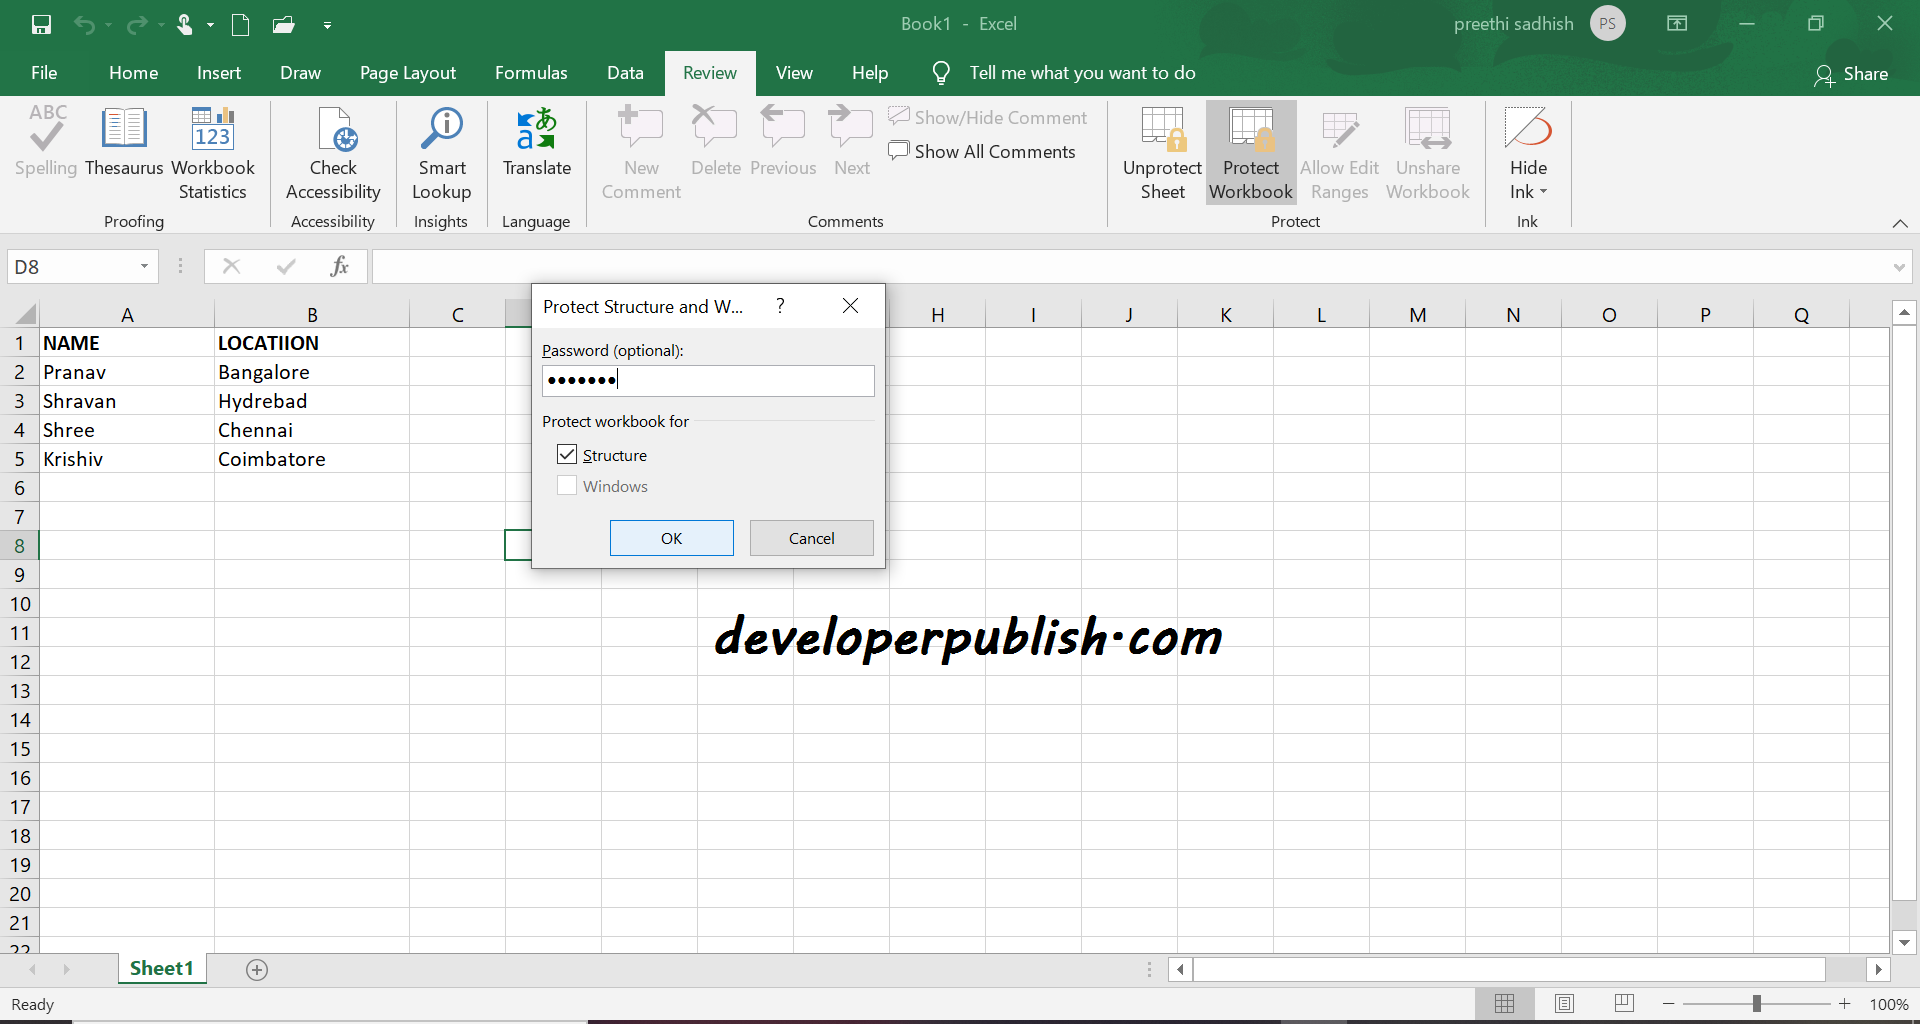 how to put password on excel file 2016